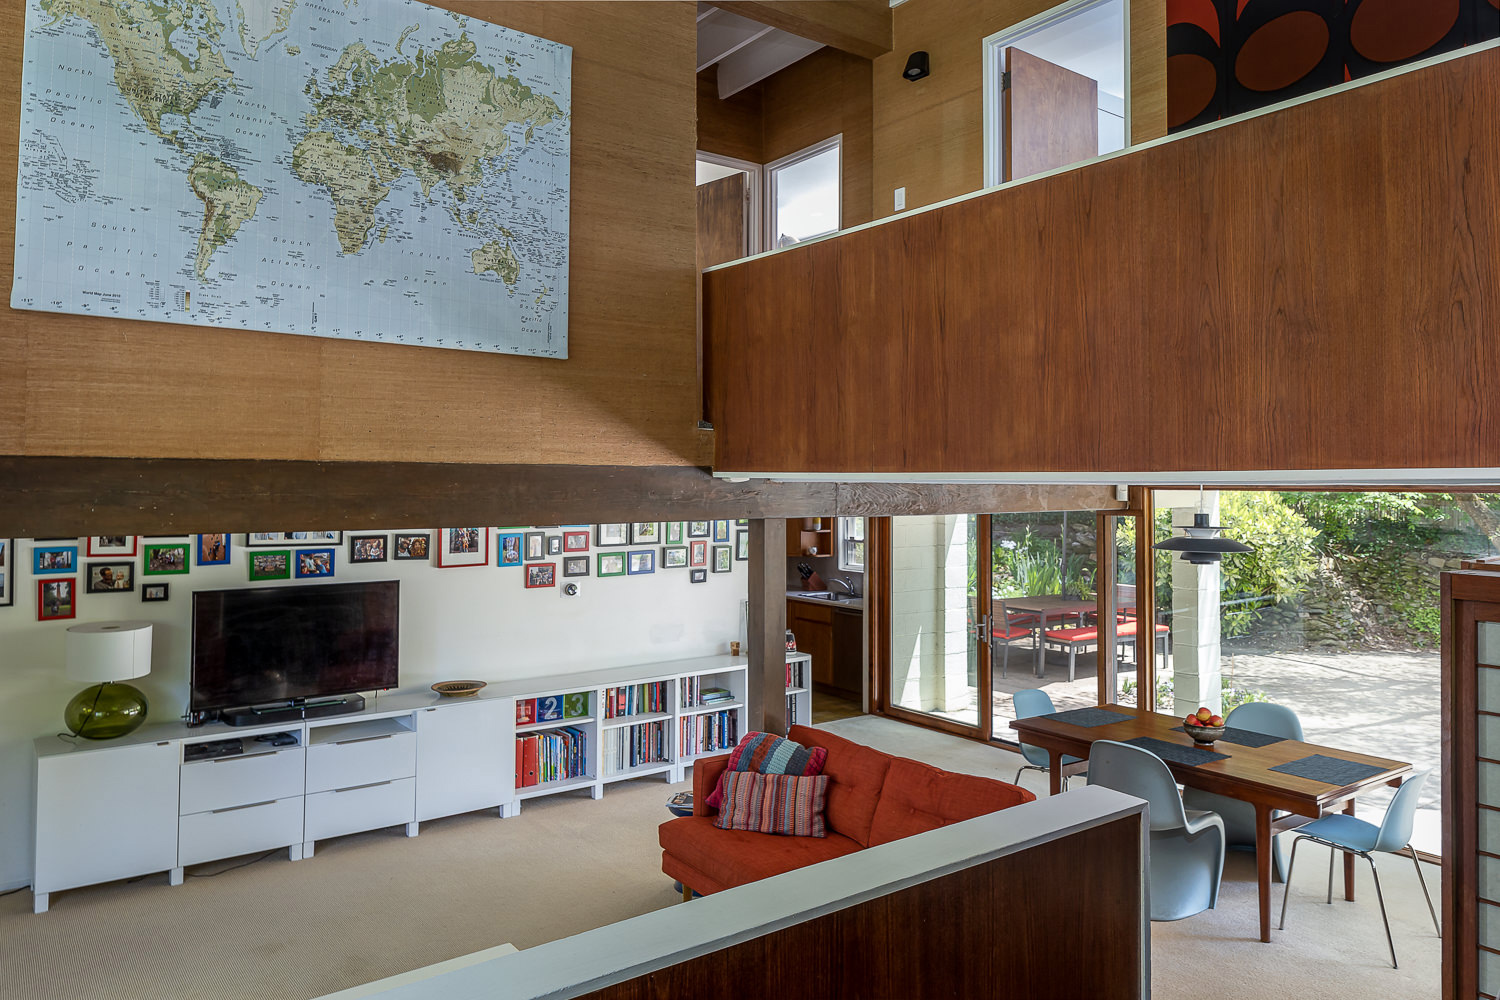 Midcentury style is alive and well Carner House – a $450k home in Philadelphia